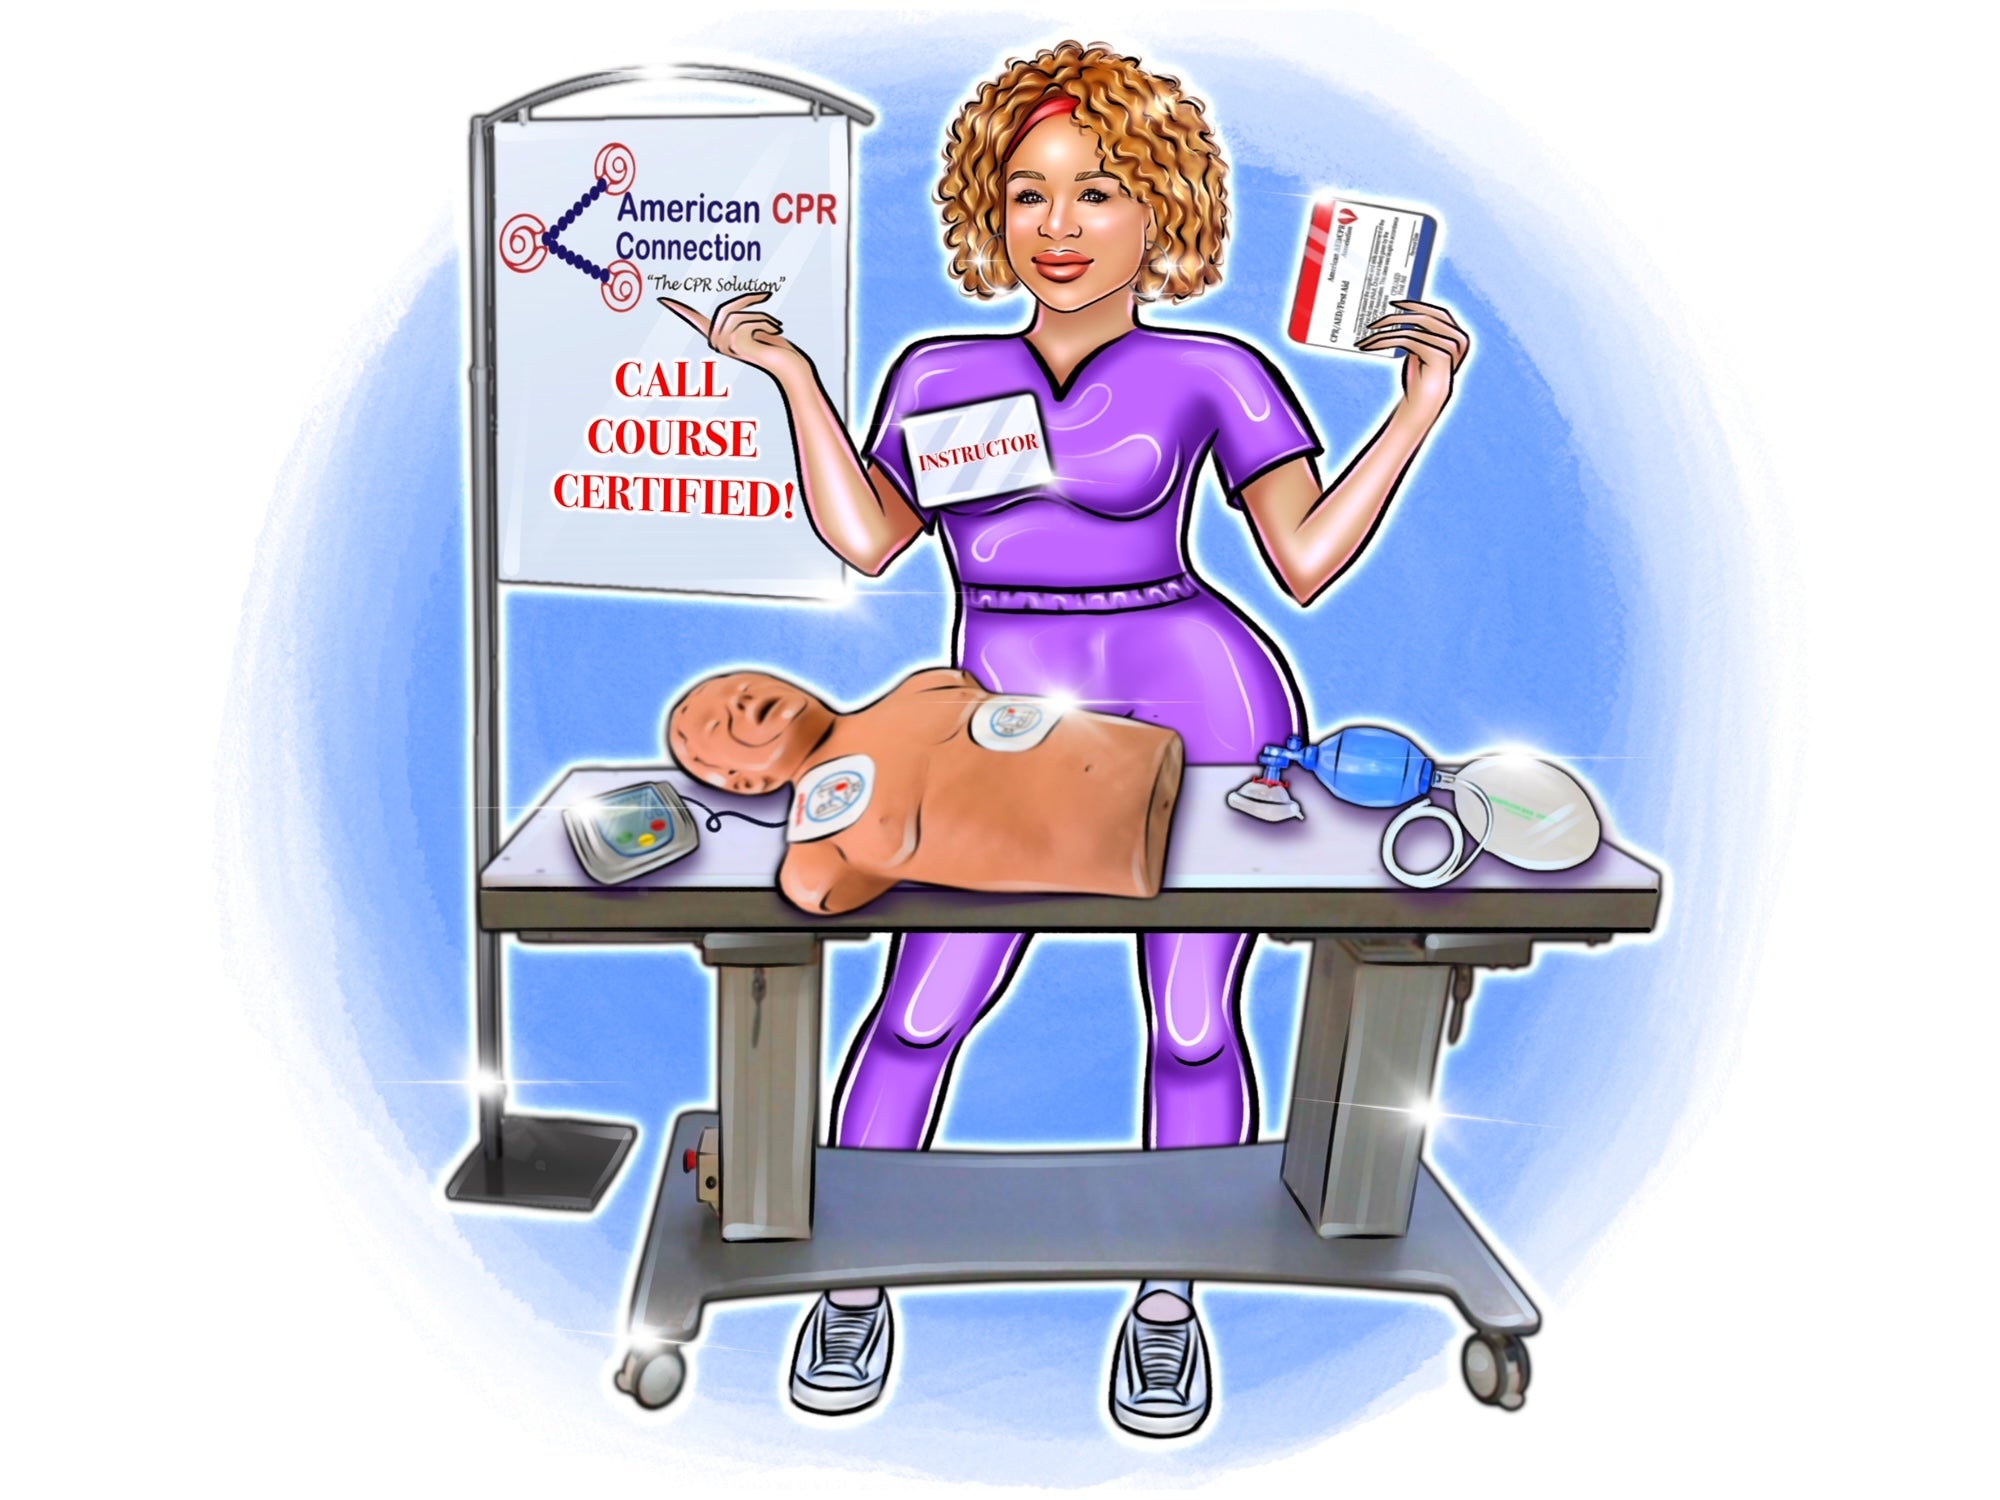 American CPR Connection